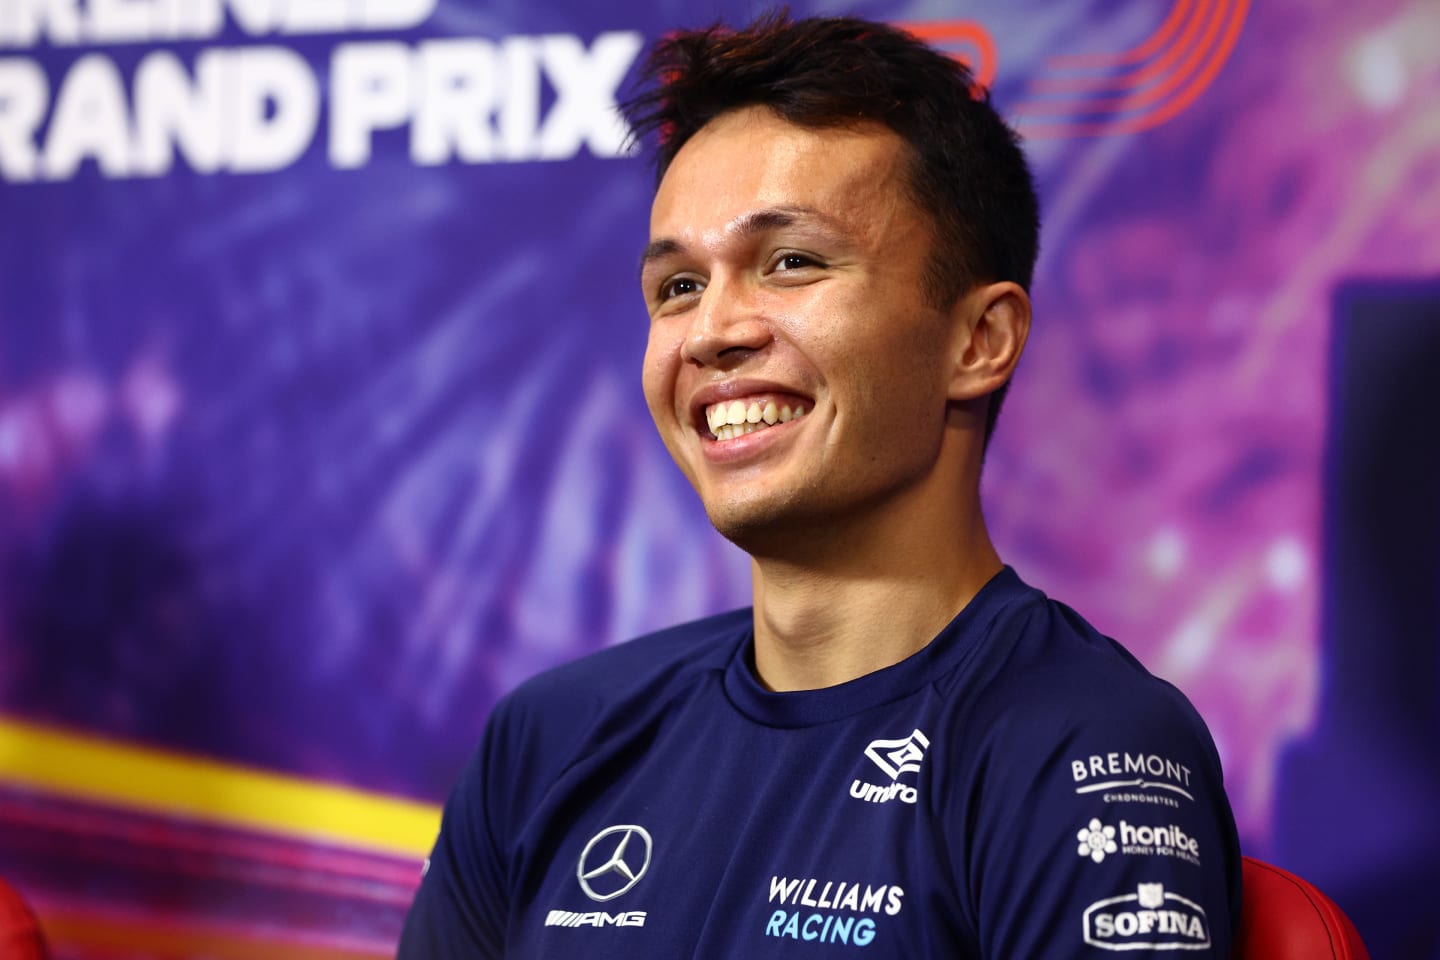 SINGAPORE, SINGAPORE - SEPTEMBER 29: Alexander Albon of Thailand and Williams attends the Drivers Press Conference during previews ahead of the F1 Grand Prix of Singapore at Marina Bay Street Circuit on September 29, 2022 in Singapore, Singapore. (Photo by Clive Rose/Getty Images,)